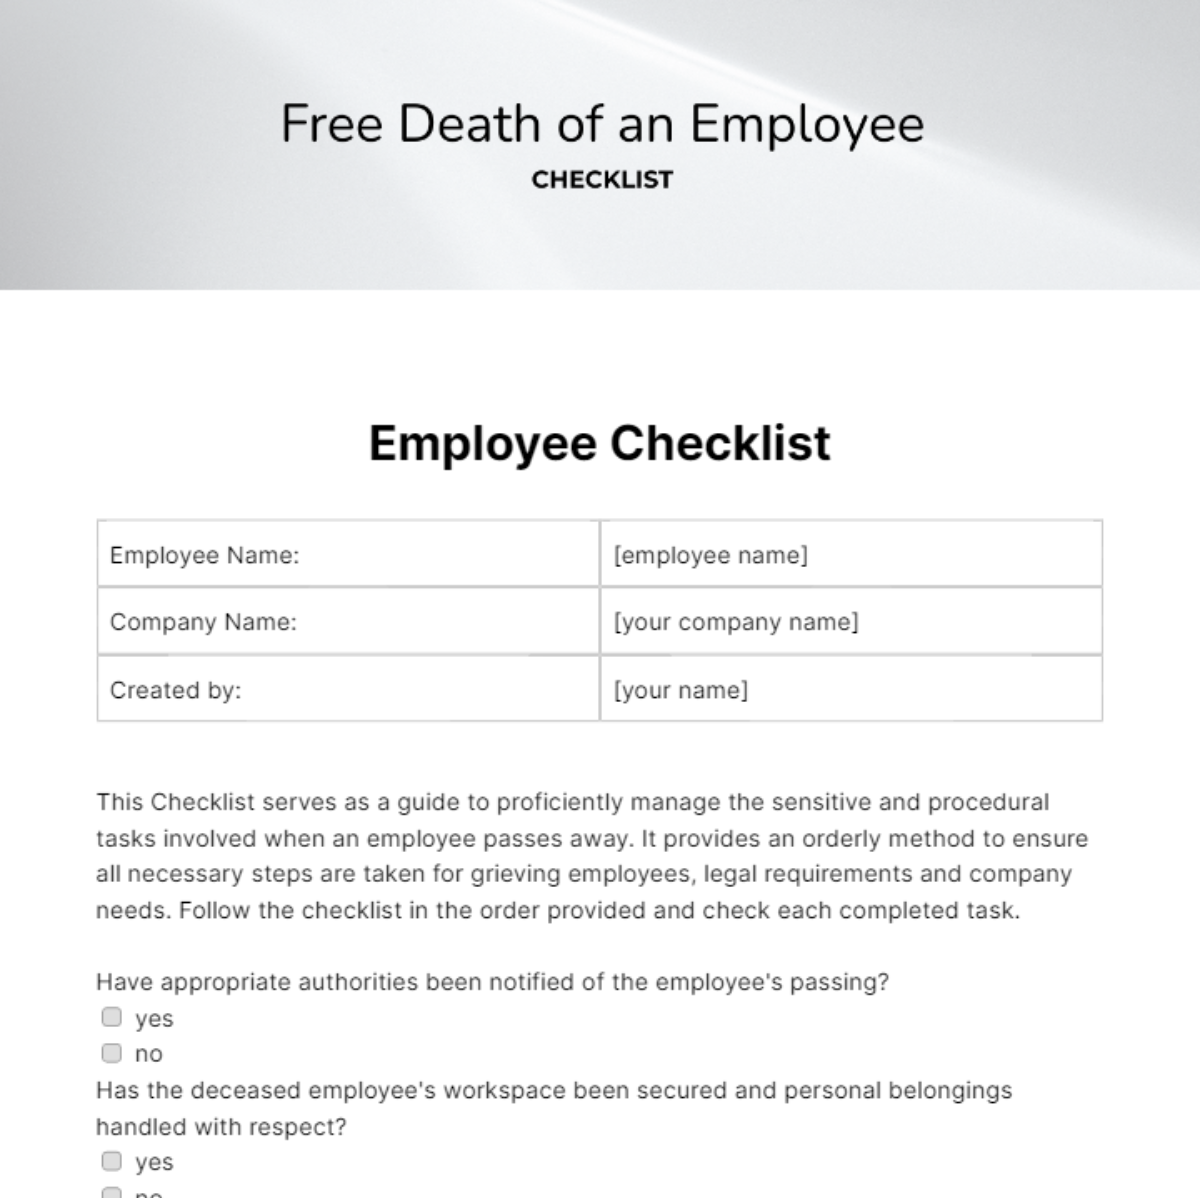 Free Death of an Employee Checklist Template